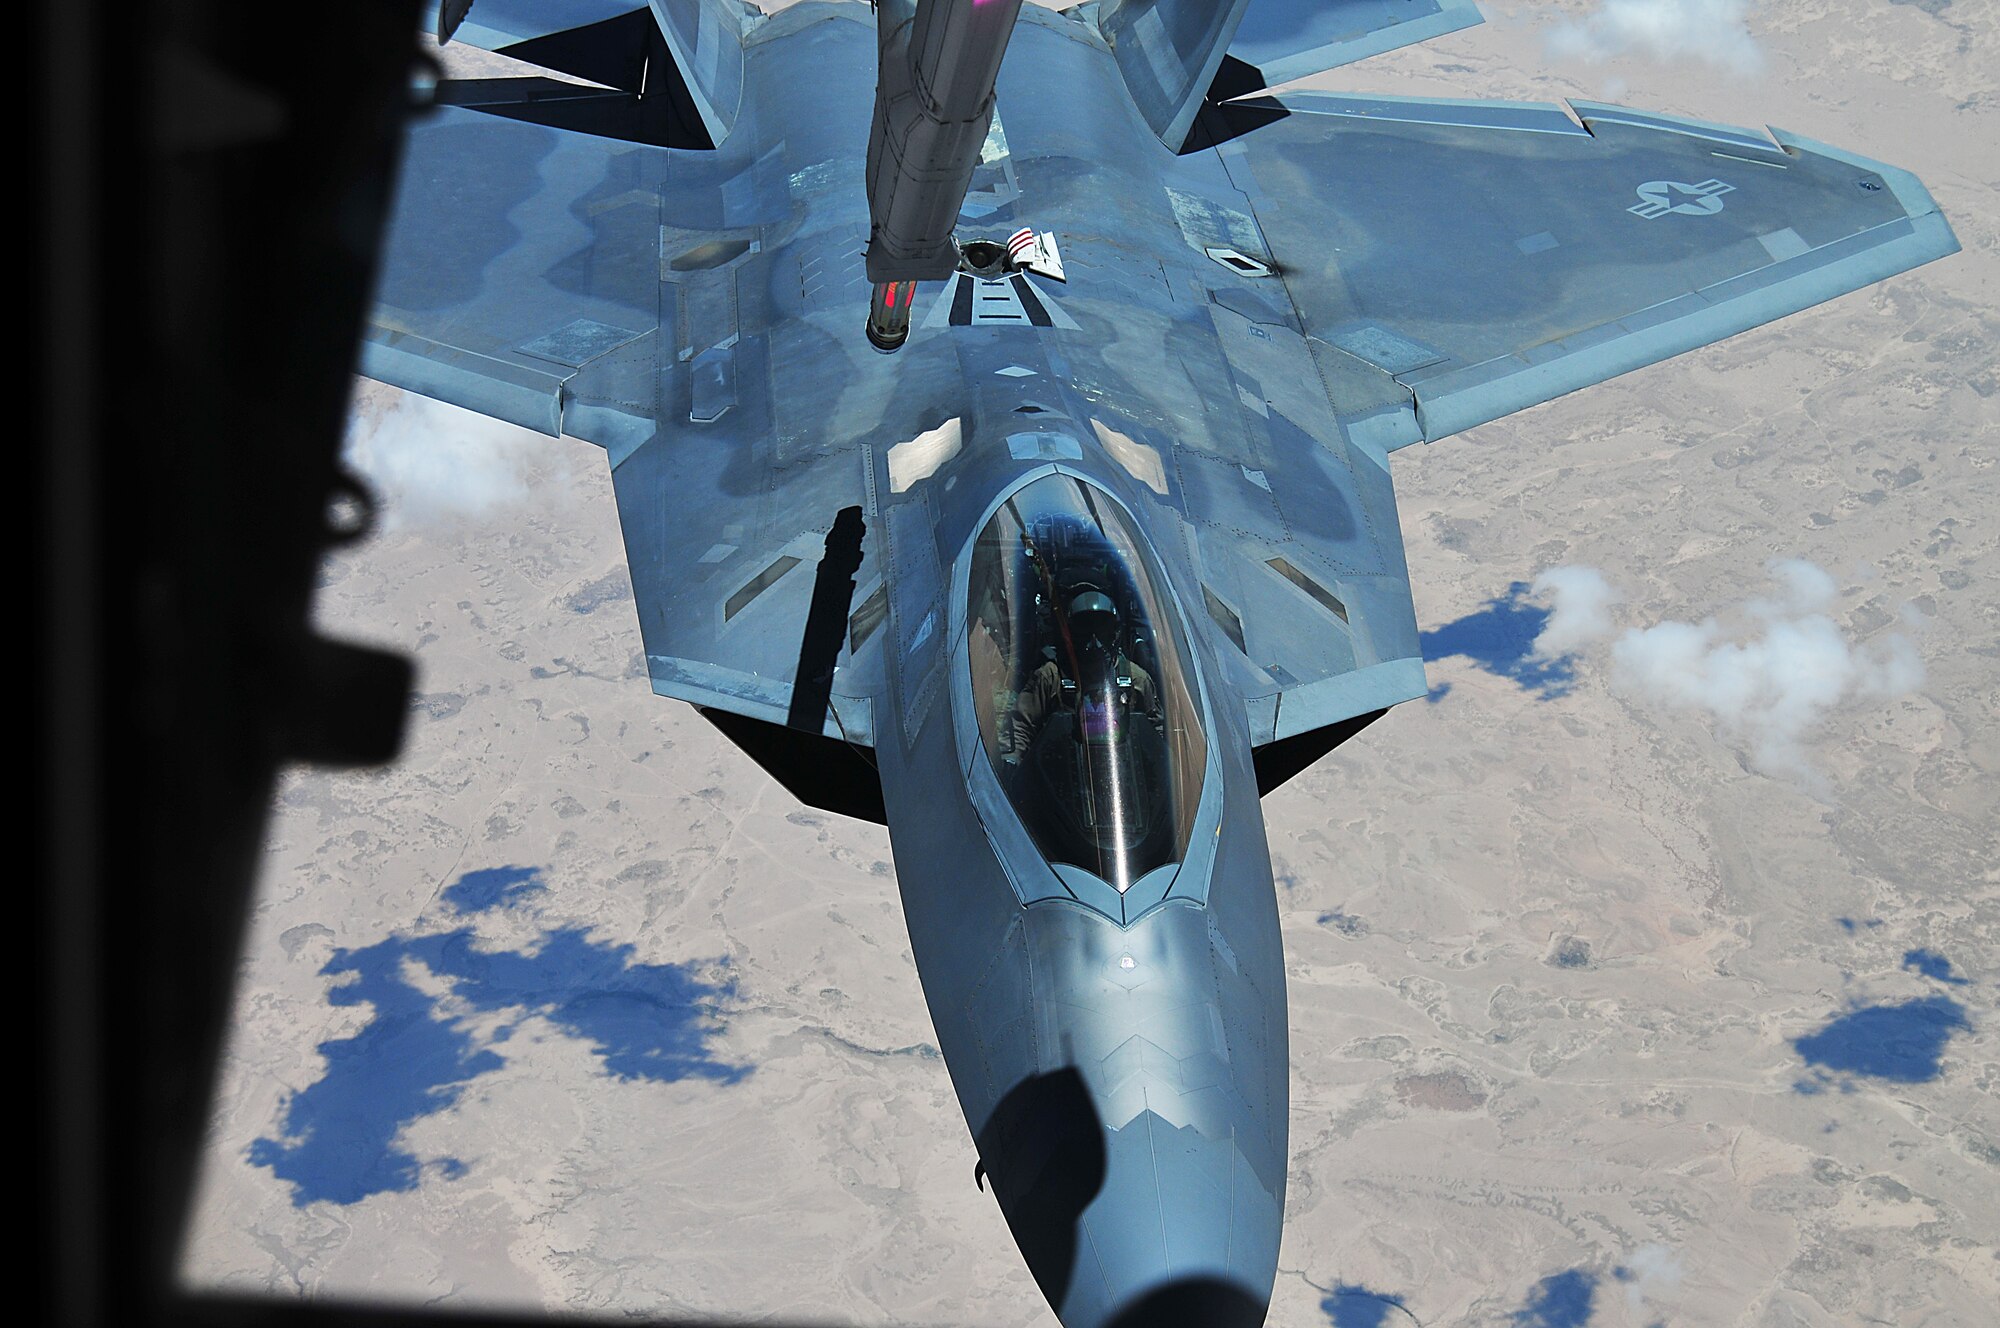 A 94th Fighter Squadron F-22 Raptor at the 380th Air Expeditionary Wing, Al Dhafra Air Base approaches a KC-10 Extender refueling aircraft operated by the 908th Air Refueling Squadron over the skies of Southwest Asia, May 16, 2018.  Air refueling is a vital component of flying operations, allowing the F-22 to stay airborne longer and support U.S. and coalition forces in the air and on the ground as a part of Operation Inherent Resolve.